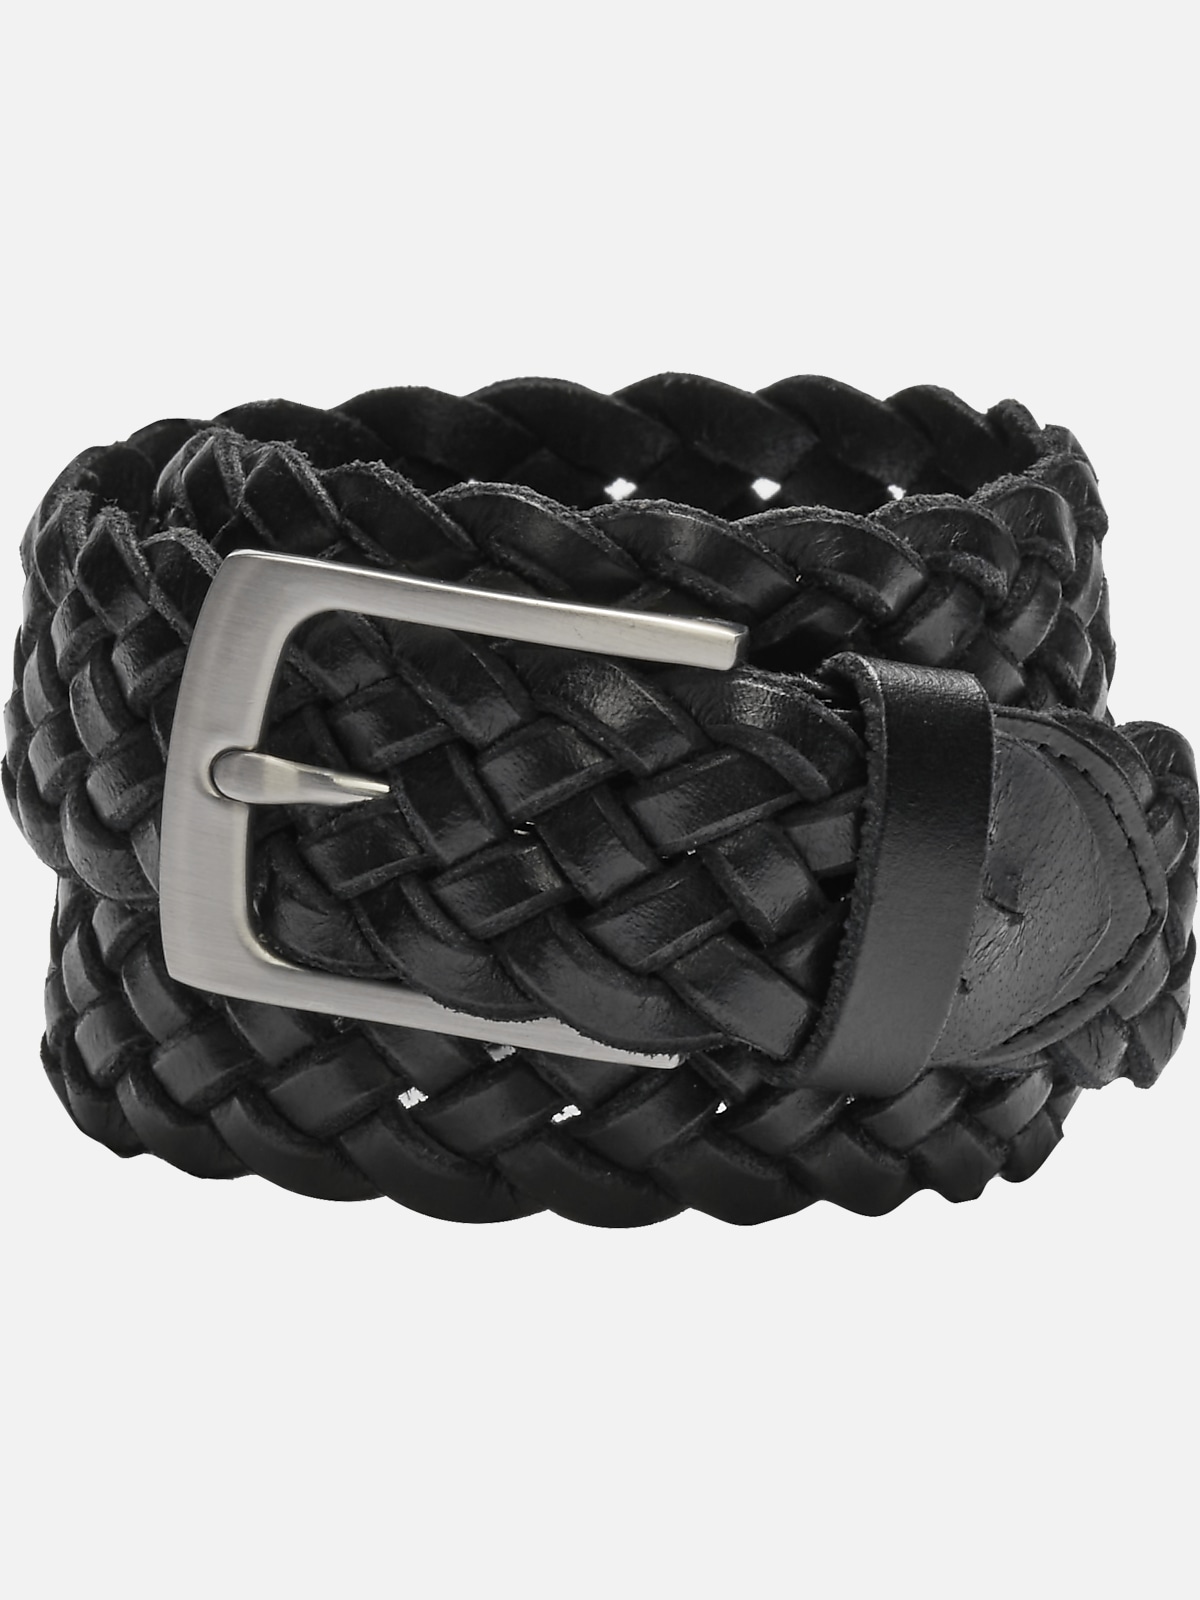 https://image.menswearhouse.com/is/image/TMW/TMW_8XRW_02_JOSEPH_ABBOUD_BELTS_BLACK_MAIN?imPolicy=pdp-zoom-mob